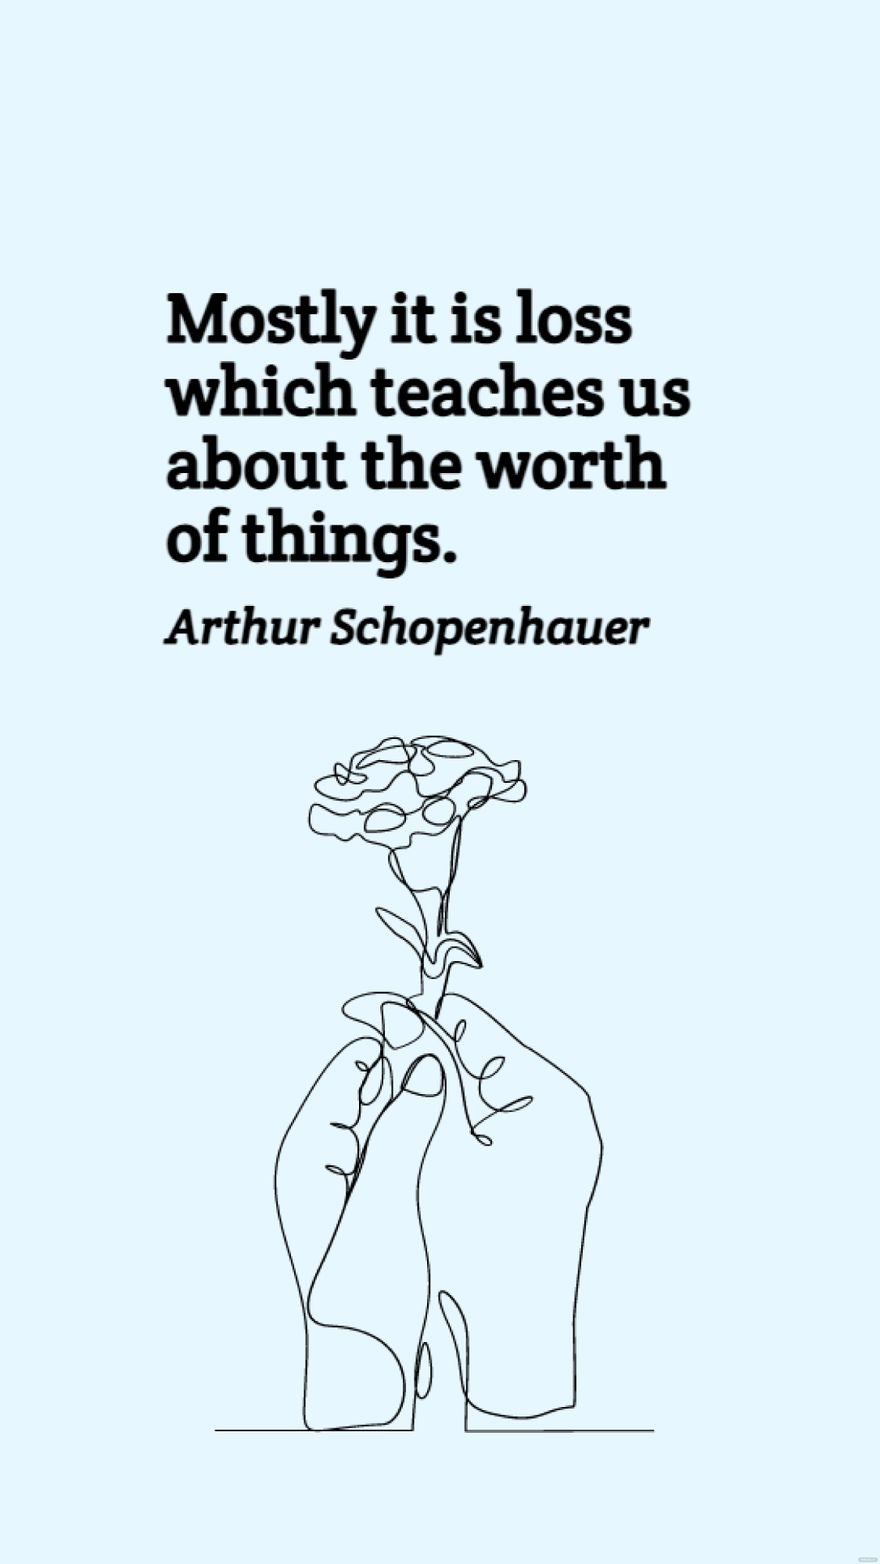 Arthur Schopenhauer - Mostly it is loss which teaches us about the worth of things.